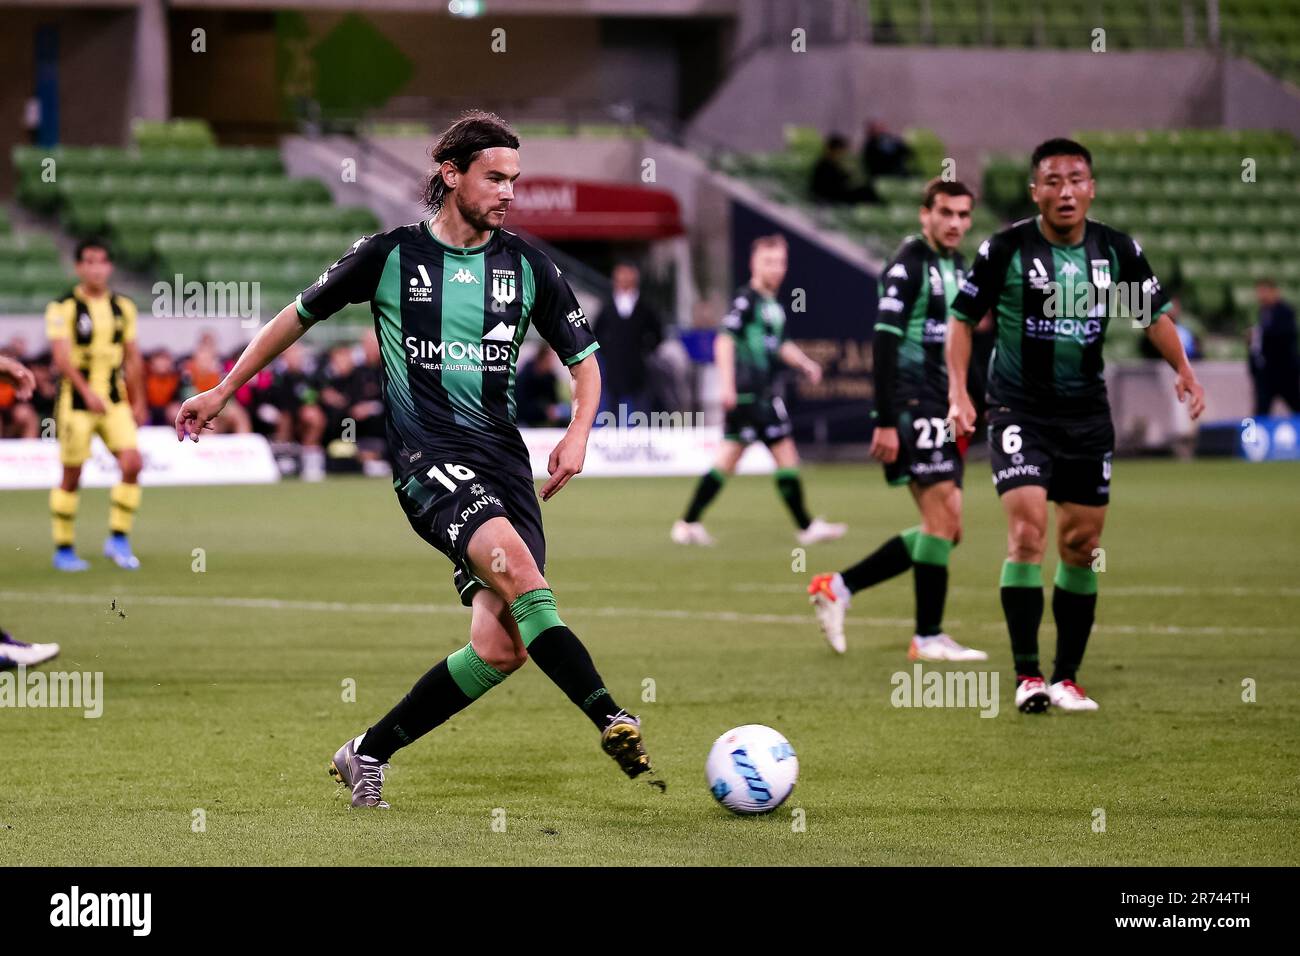 MELBOURNE, AUSTRALIA - MAY 14: Rene Krhin of Western United controls the ball during the A-League Elimination Final soccer match between Western United and Wellington Phoenix at AAMI Park on May 14, 2022 in Melbourne, Australia. Stock Photo